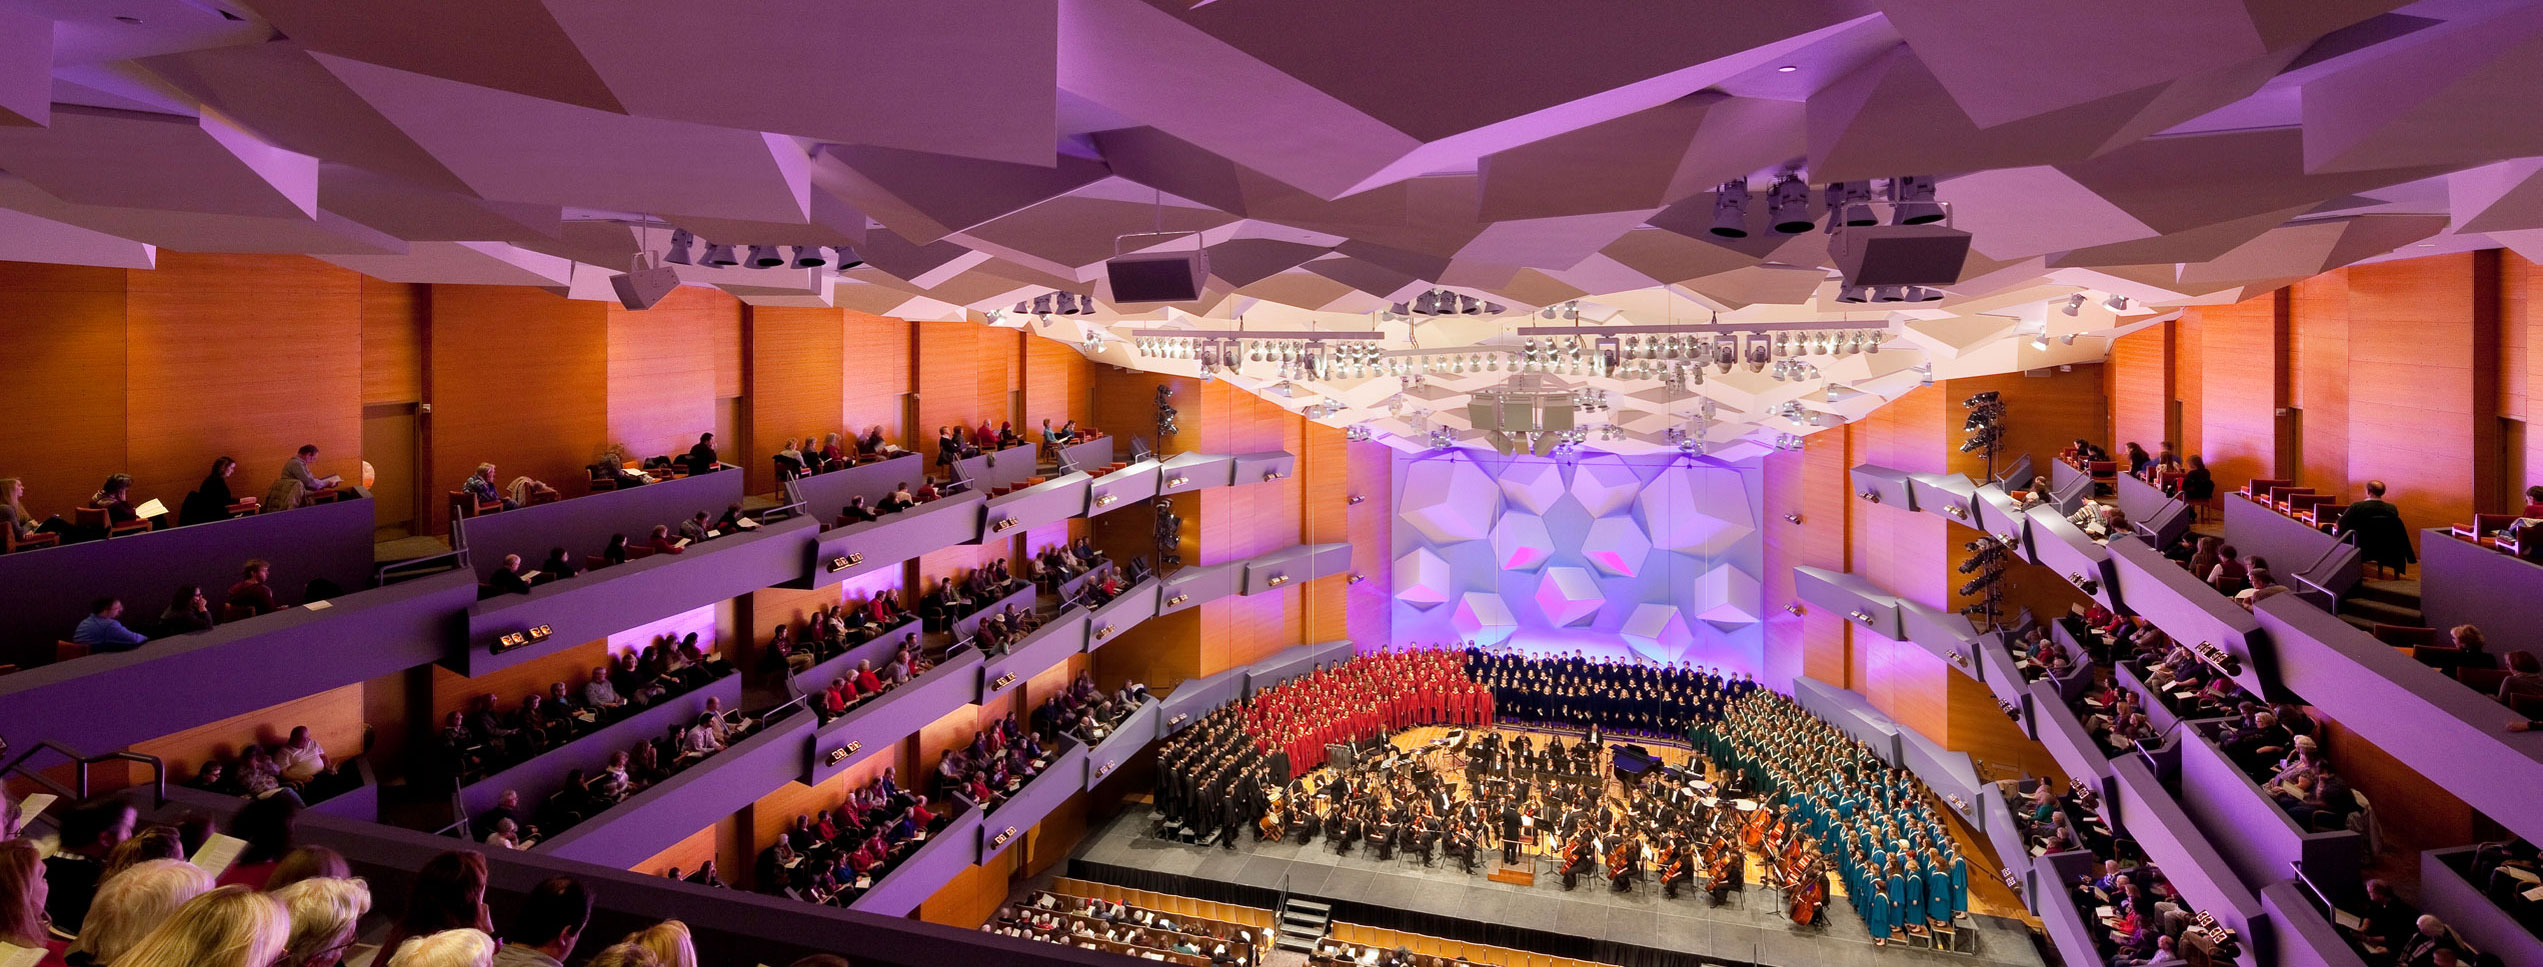 bright purple lighting in new construction orchestra hall